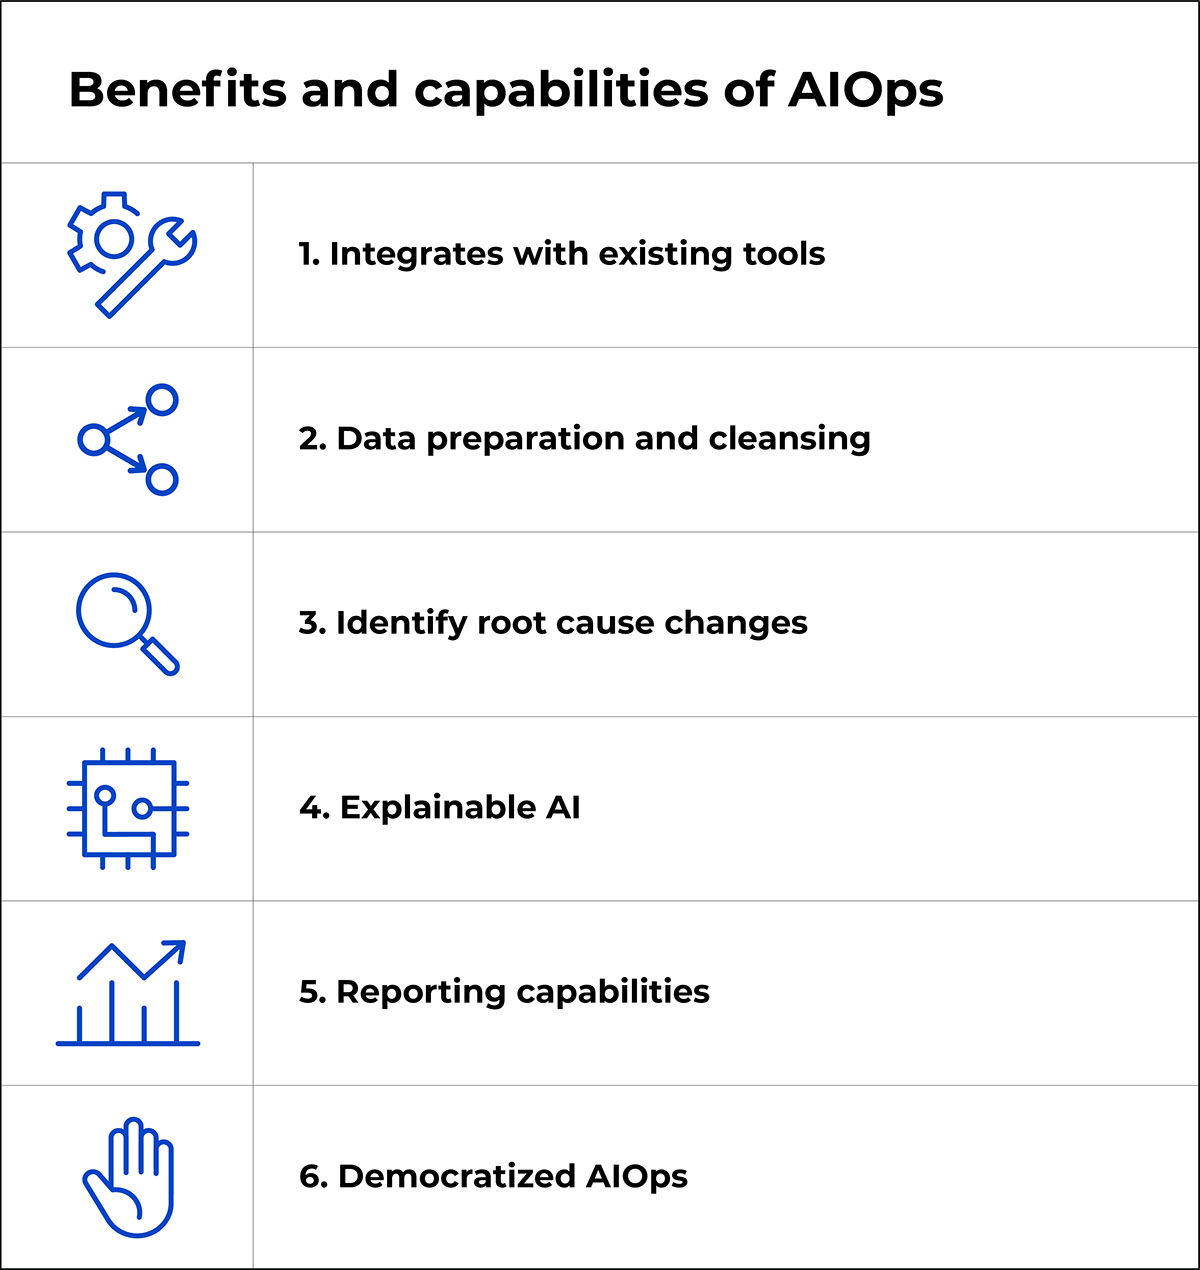 What are the benefits and capabilities of AIOps?